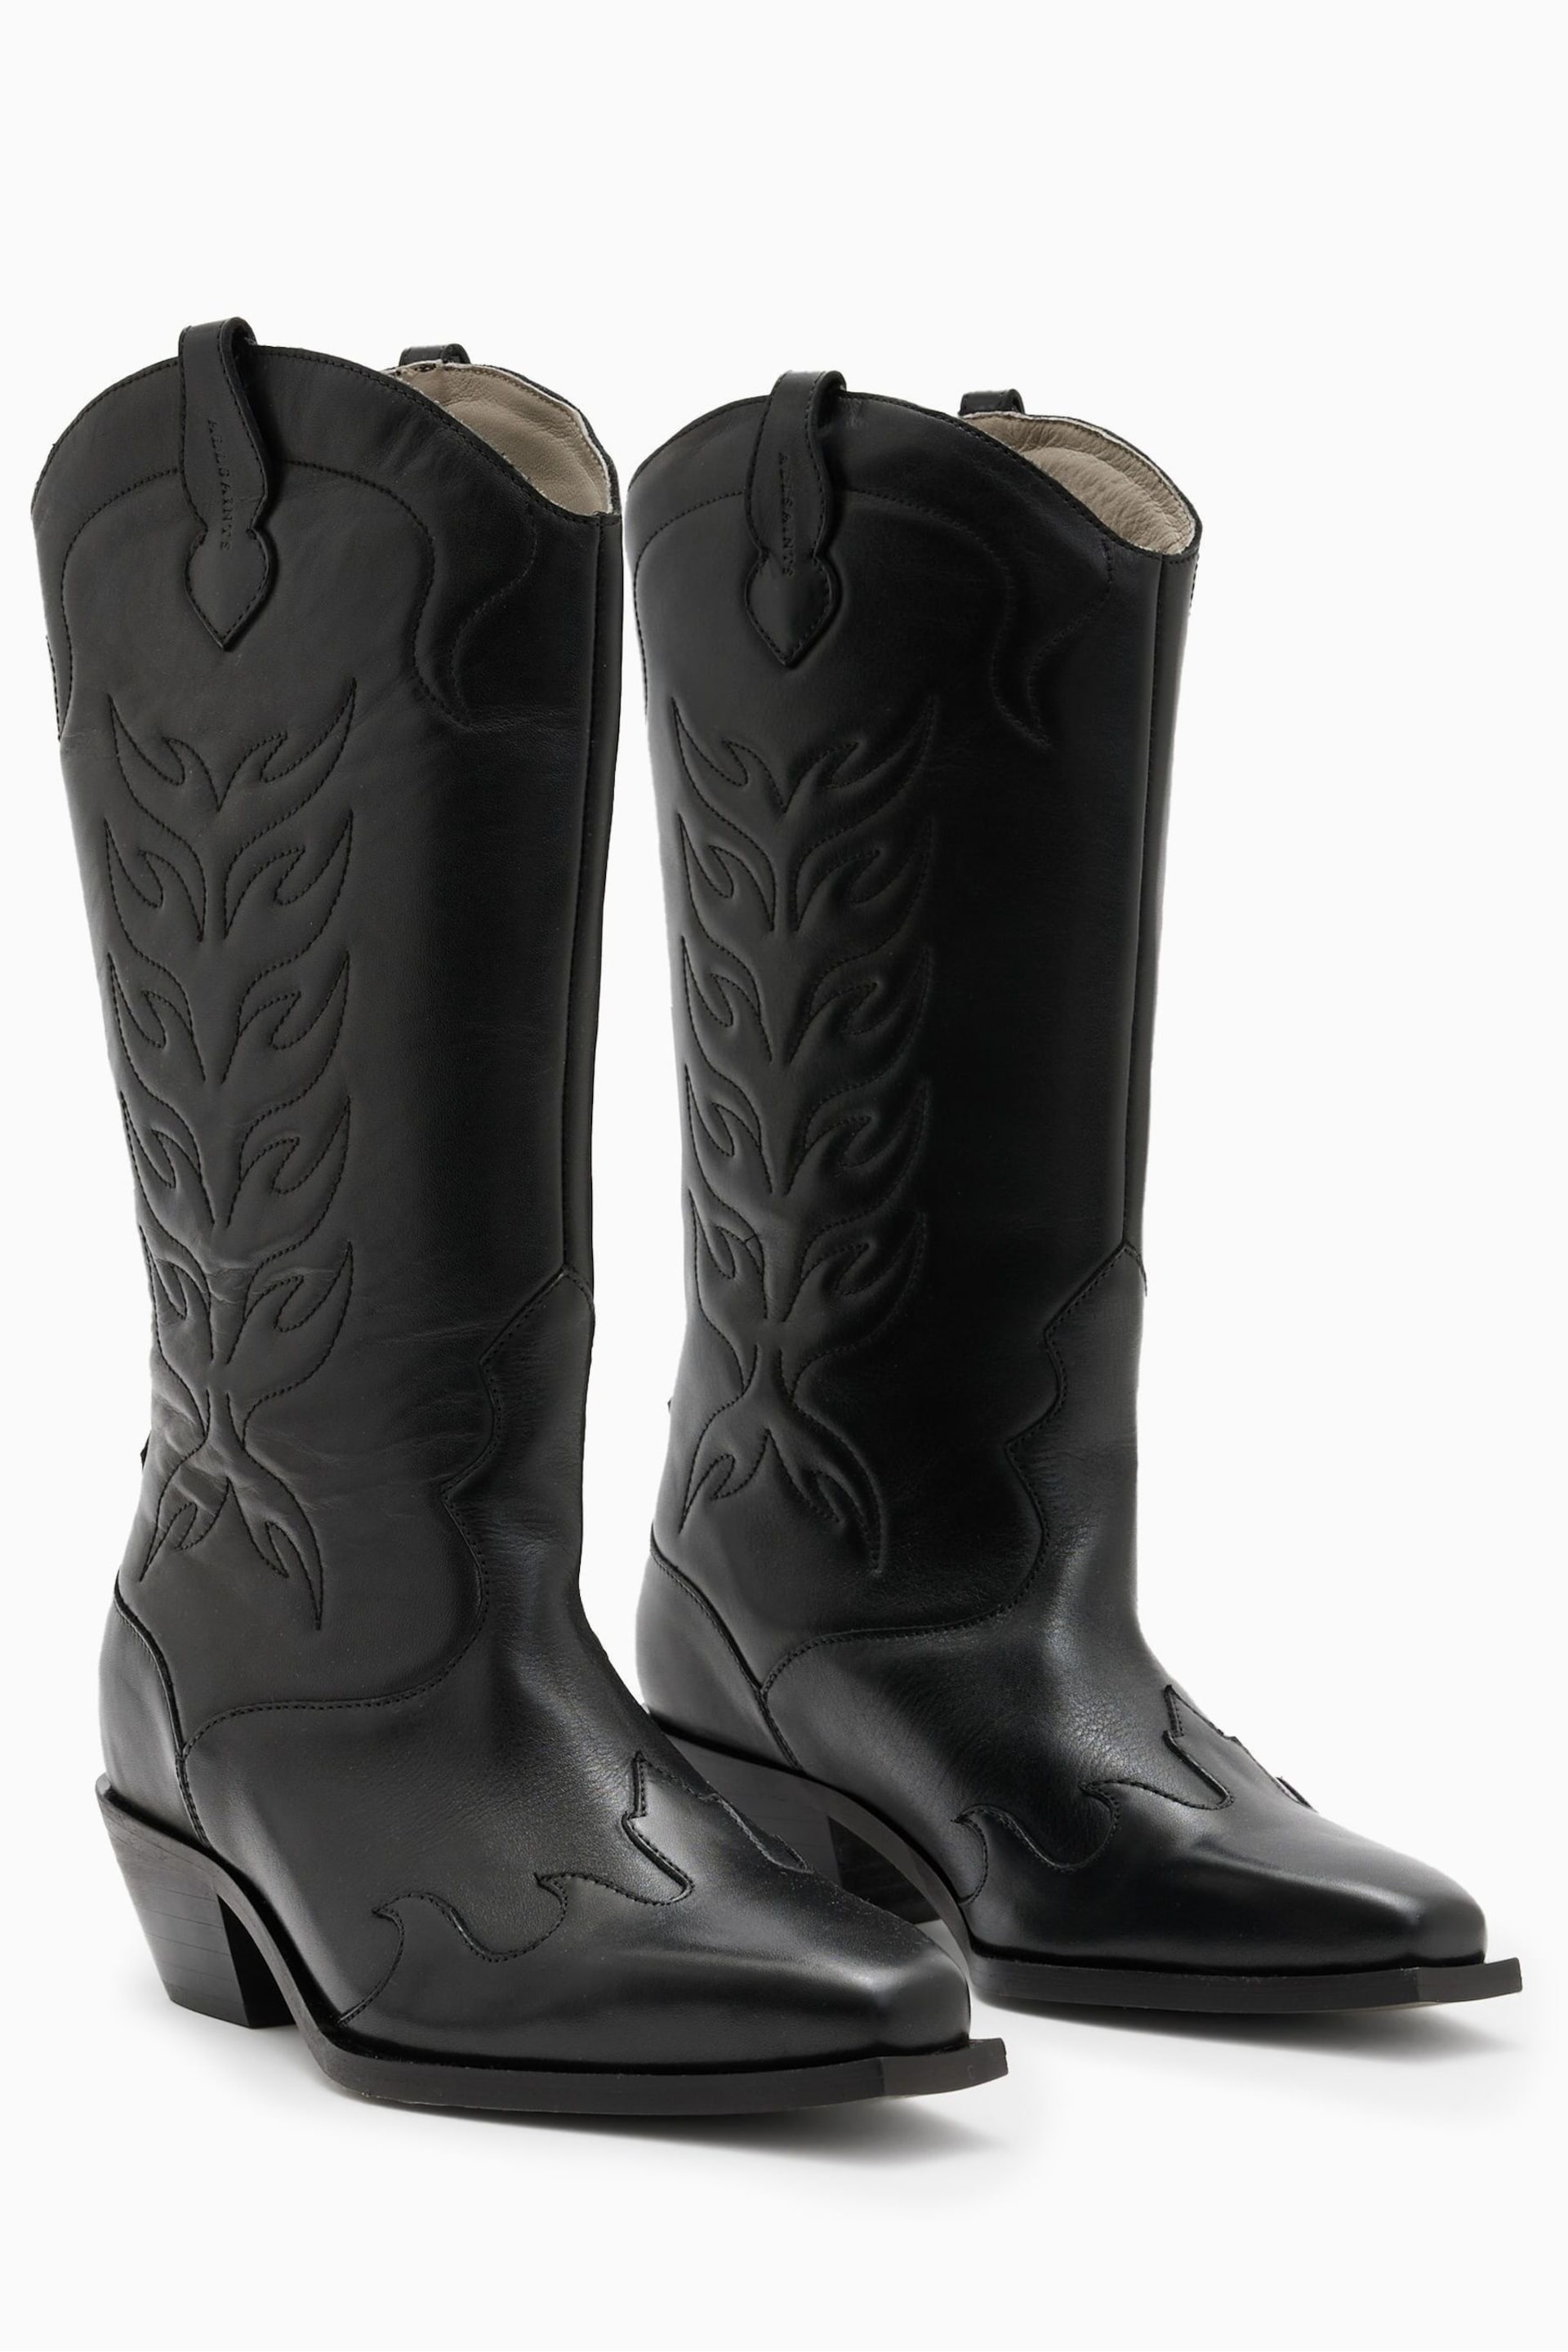 AllSaints Black Dolly Boots - Image 3 of 6